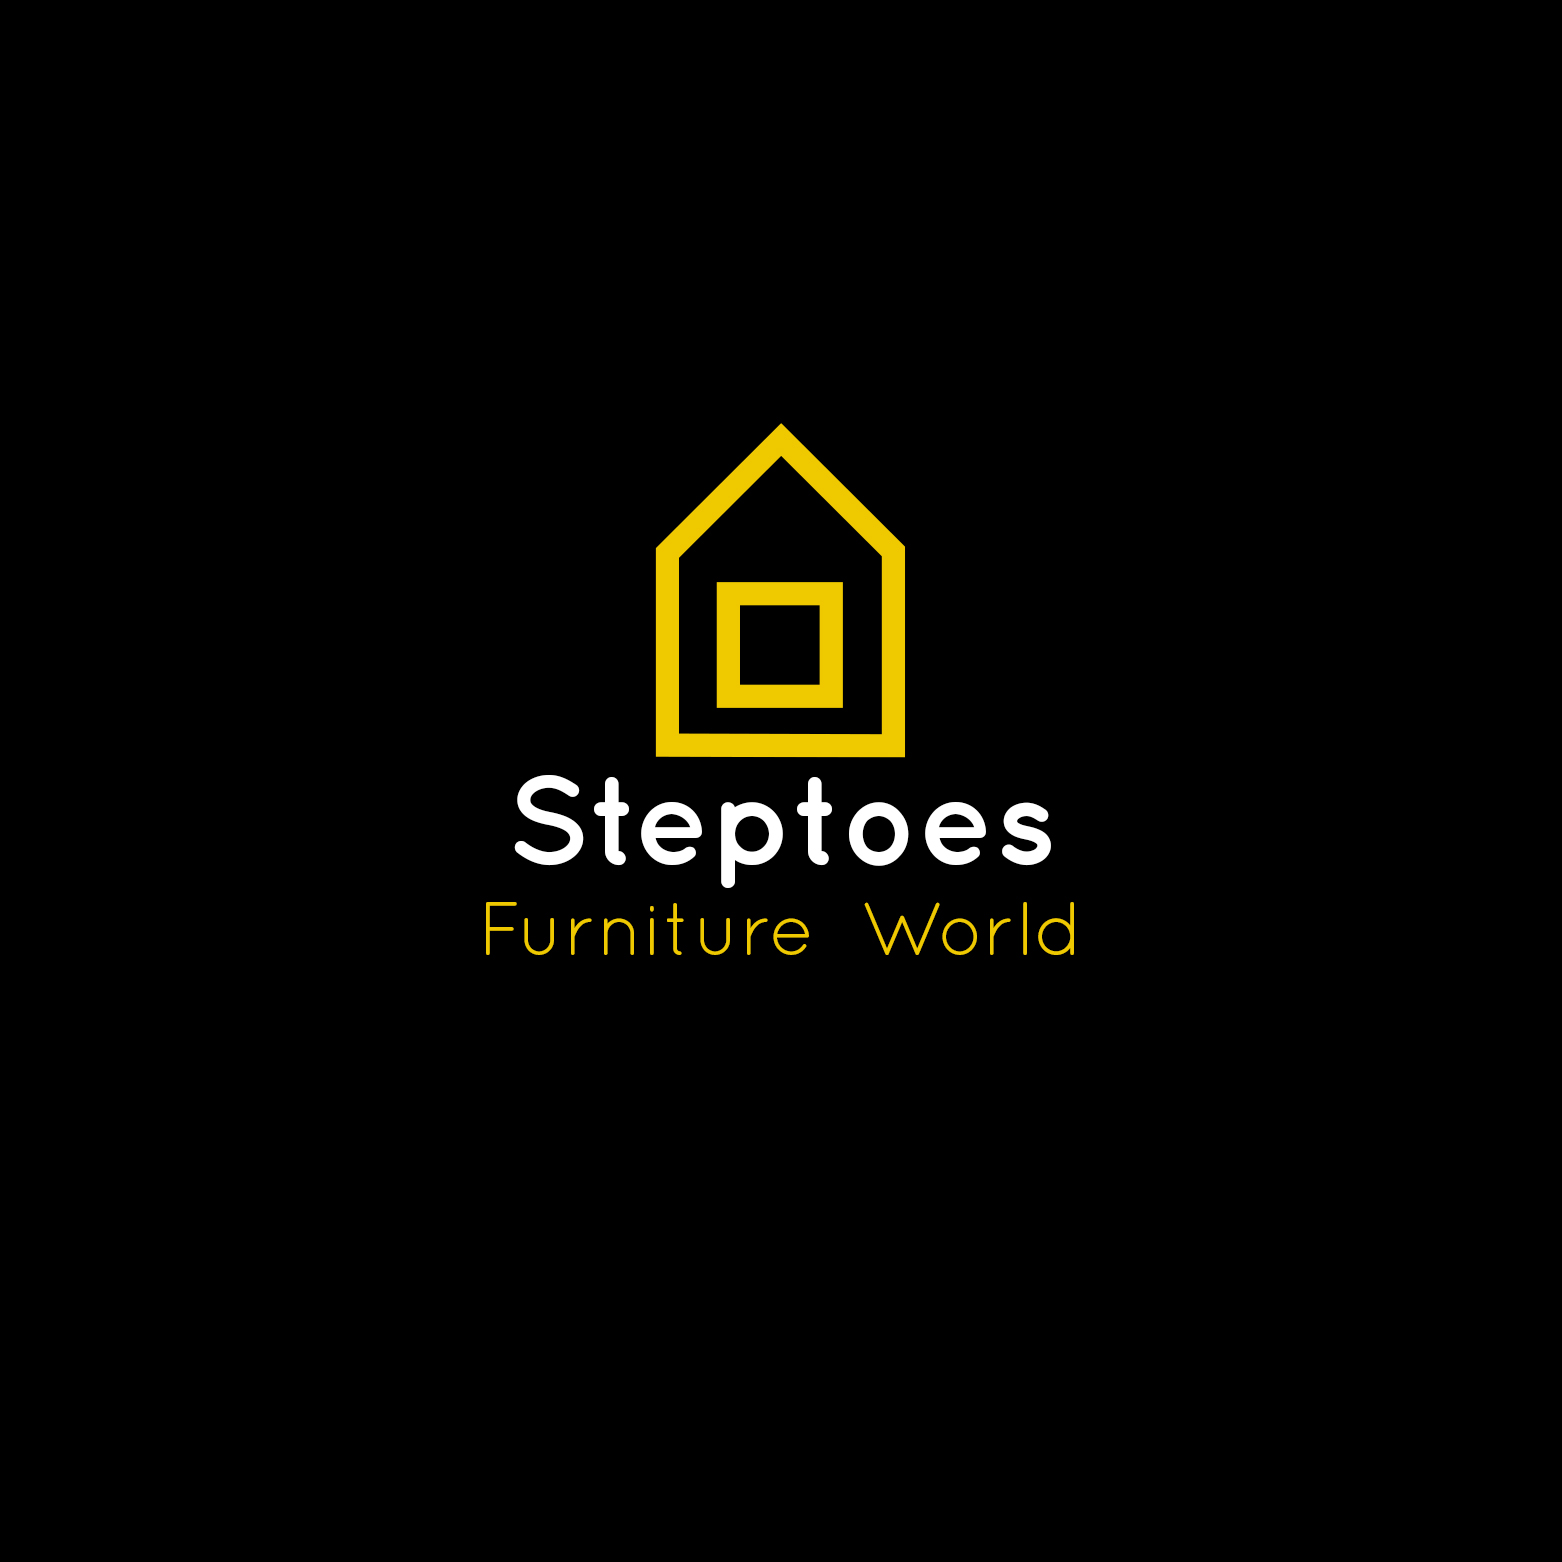 Steptoes Home Furniture - lounge - dining - bedroom - furniture - mattress - mattresses - sofa - home accessories - home decor - farmhouse - modern - wooden - fabric - steptoes - paphos - cyprus